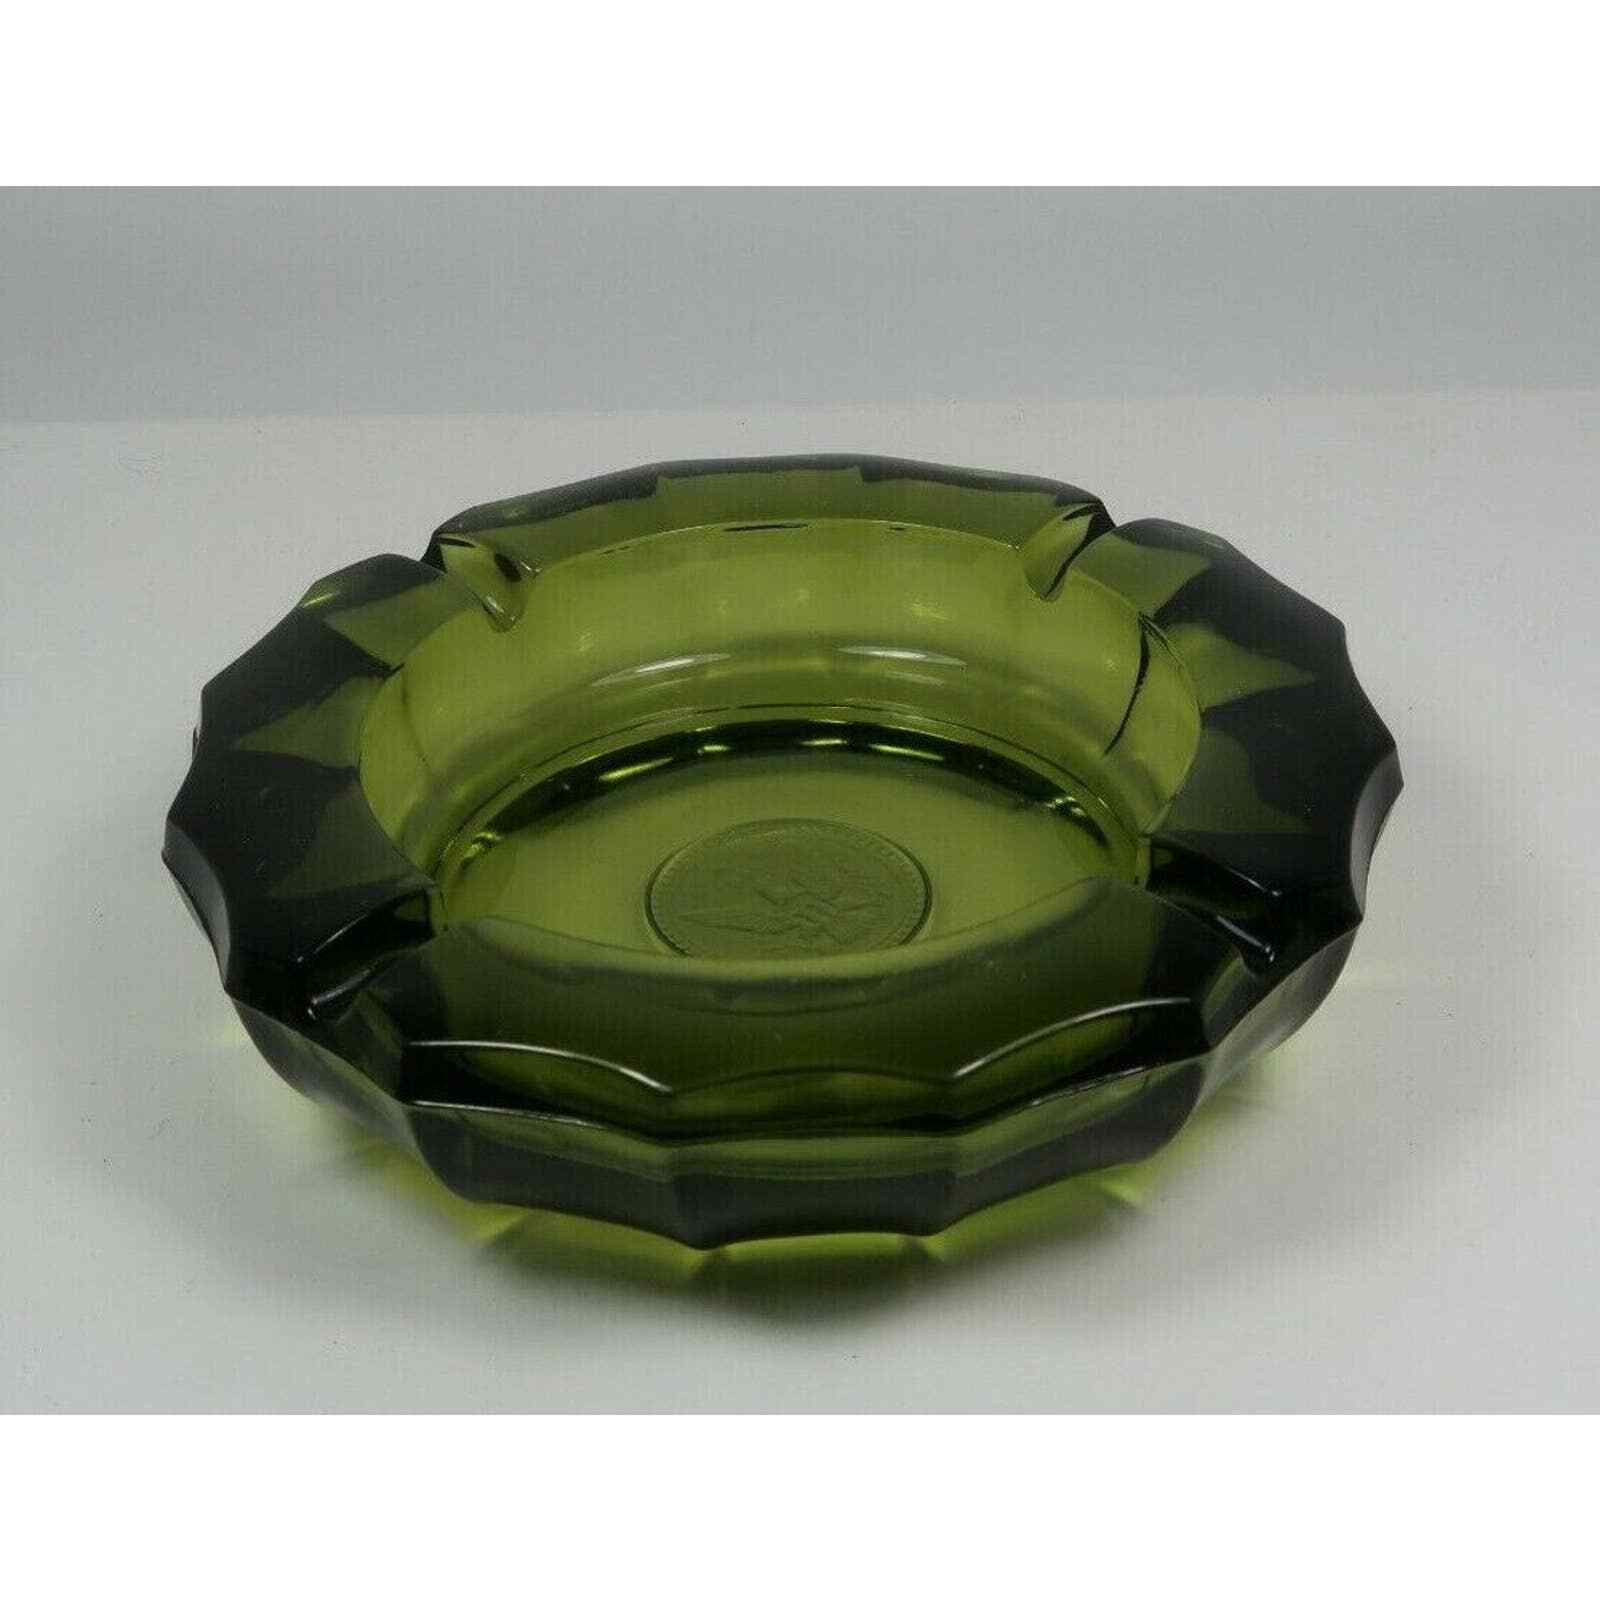 Vintage Heavy 1887 Eagle Coin Green Glass Ashtray - 5 Inch Very Good Condition